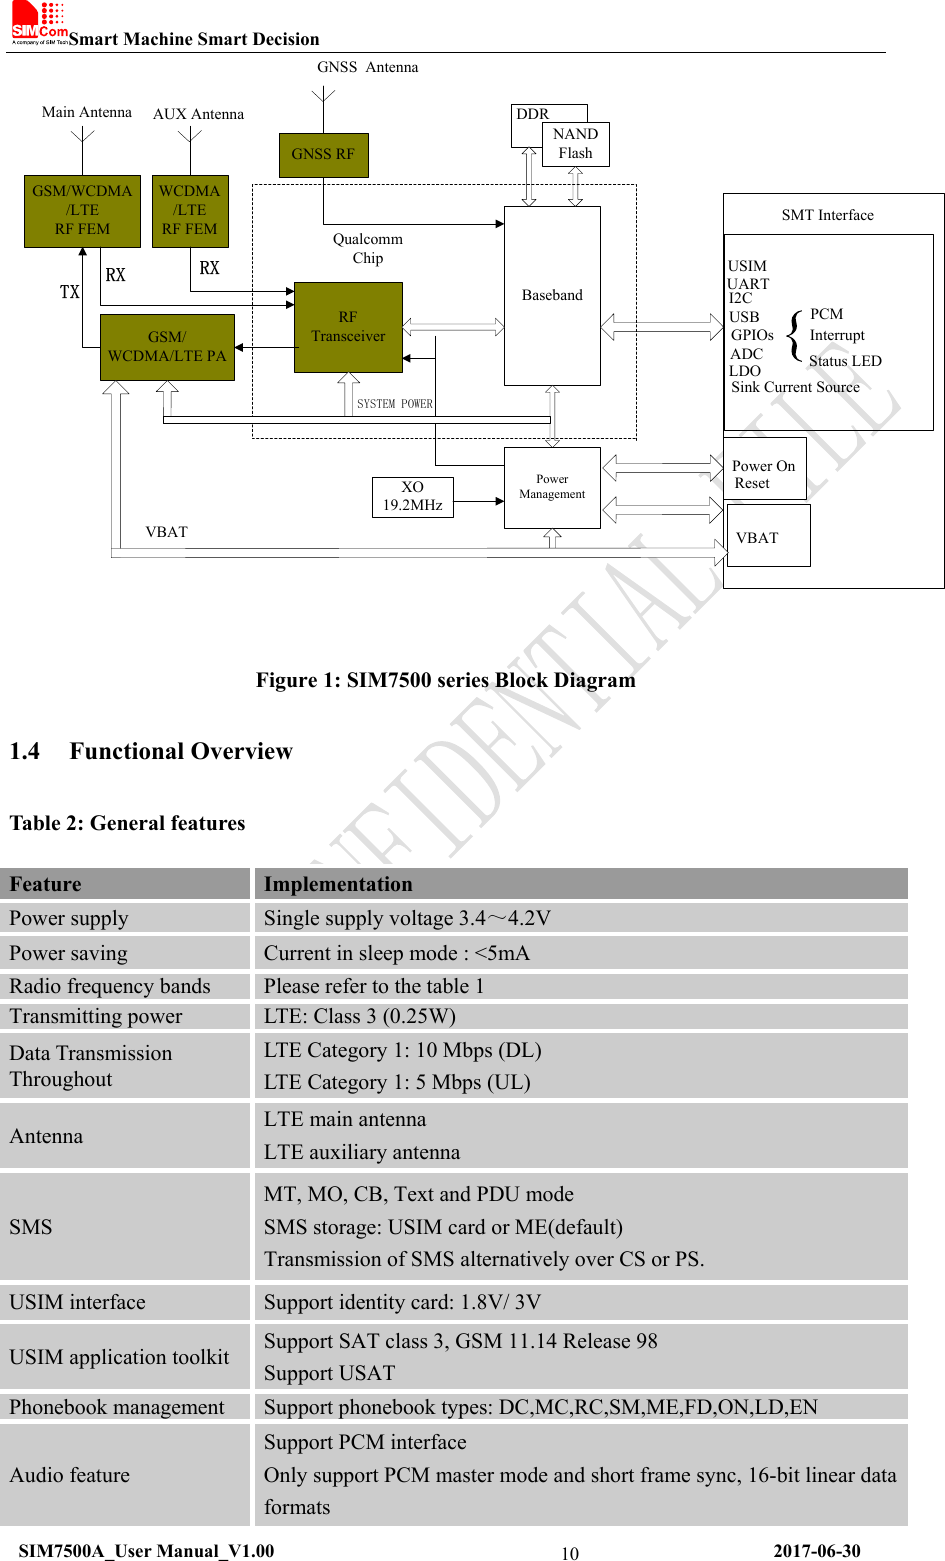 Smart Machine Smart Decision   SIM7500A_User Manual_V1.00                                                      2017-06-30 10GSM/WCDMA/LTERF FEMGSM/ WCDMA/LTE PARF TransceiverBasebandXO19.2MHzNANDFlashI2CPCMInterruptStatus LEDUSBUSIMPower OnResetUARTGPIOsADCLDOVBATSink Current SourceDDRMain AntennaPowerManagementQualcomm ChipSMT InterfaceWCDMA/LTERF FEMAUX AntennaSYSTEM POWERVBATGNSS RFGNSS Antenna Figure 1: SIM7500 series Block Diagram 1.4 Functional Overview Table 2: General features Feature  Implementation Power supply  Single supply voltage 3.4～4.2V Power saving  Current in sleep mode : &lt;5mA Radio frequency bands  Please refer to the table 1 Transmitting power  LTE: Class 3 (0.25W)   Data Transmission Throughout LTE Category 1: 10 Mbps (DL)   LTE Category 1: 5 Mbps (UL) Antenna  LTE main antenna LTE auxiliary antenna SMS MT, MO, CB, Text and PDU mode SMS storage: USIM card or ME(default) Transmission of SMS alternatively over CS or PS. USIM interface  Support identity card: 1.8V/ 3V USIM application toolkit  Support SAT class 3, GSM 11.14 Release 98 Support USAT Phonebook management  Support phonebook types: DC,MC,RC,SM,ME,FD,ON,LD,EN Audio feature Support PCM interface Only support PCM master mode and short frame sync, 16-bit linear data formats 